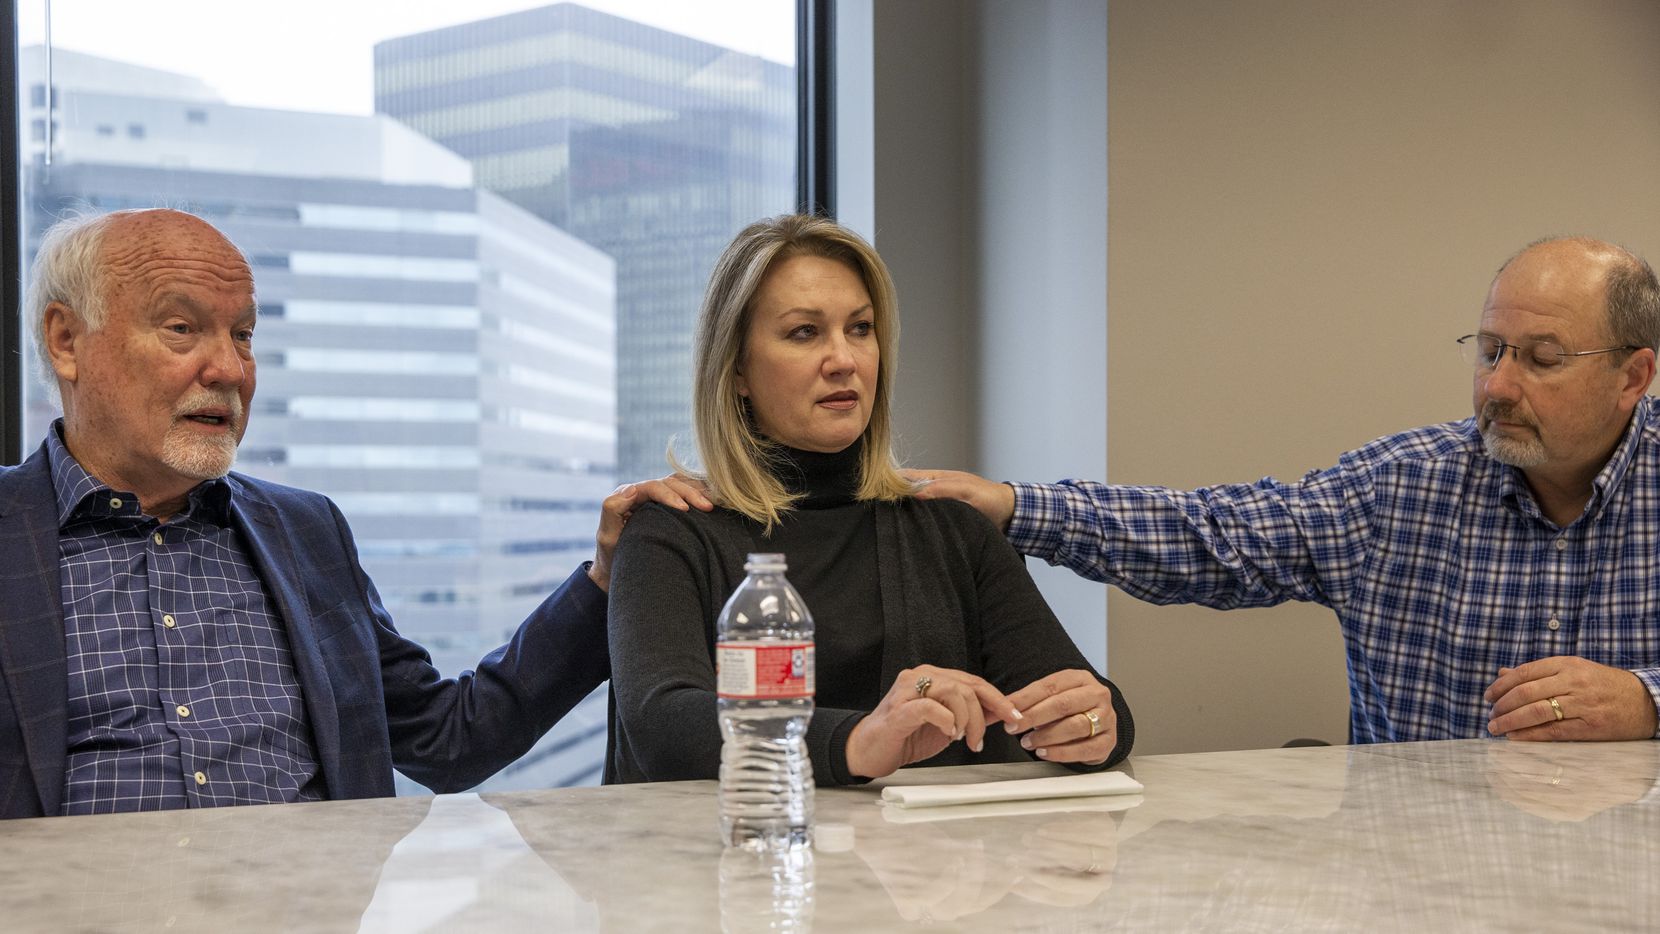 Cliff Harris (from left), his wife, Karen Harris, and her brother, David Nelson recount the details surrounding the 2018 death of the siblings' mother, Miriam Nelson, at Preston Place Retirement Community during a meeting at Dallas attorney Trey Crawford's downtown office. Miriam Nelson is believed to be a victim of serial murder suspect Billy Chemirmir, new lawsuits state.